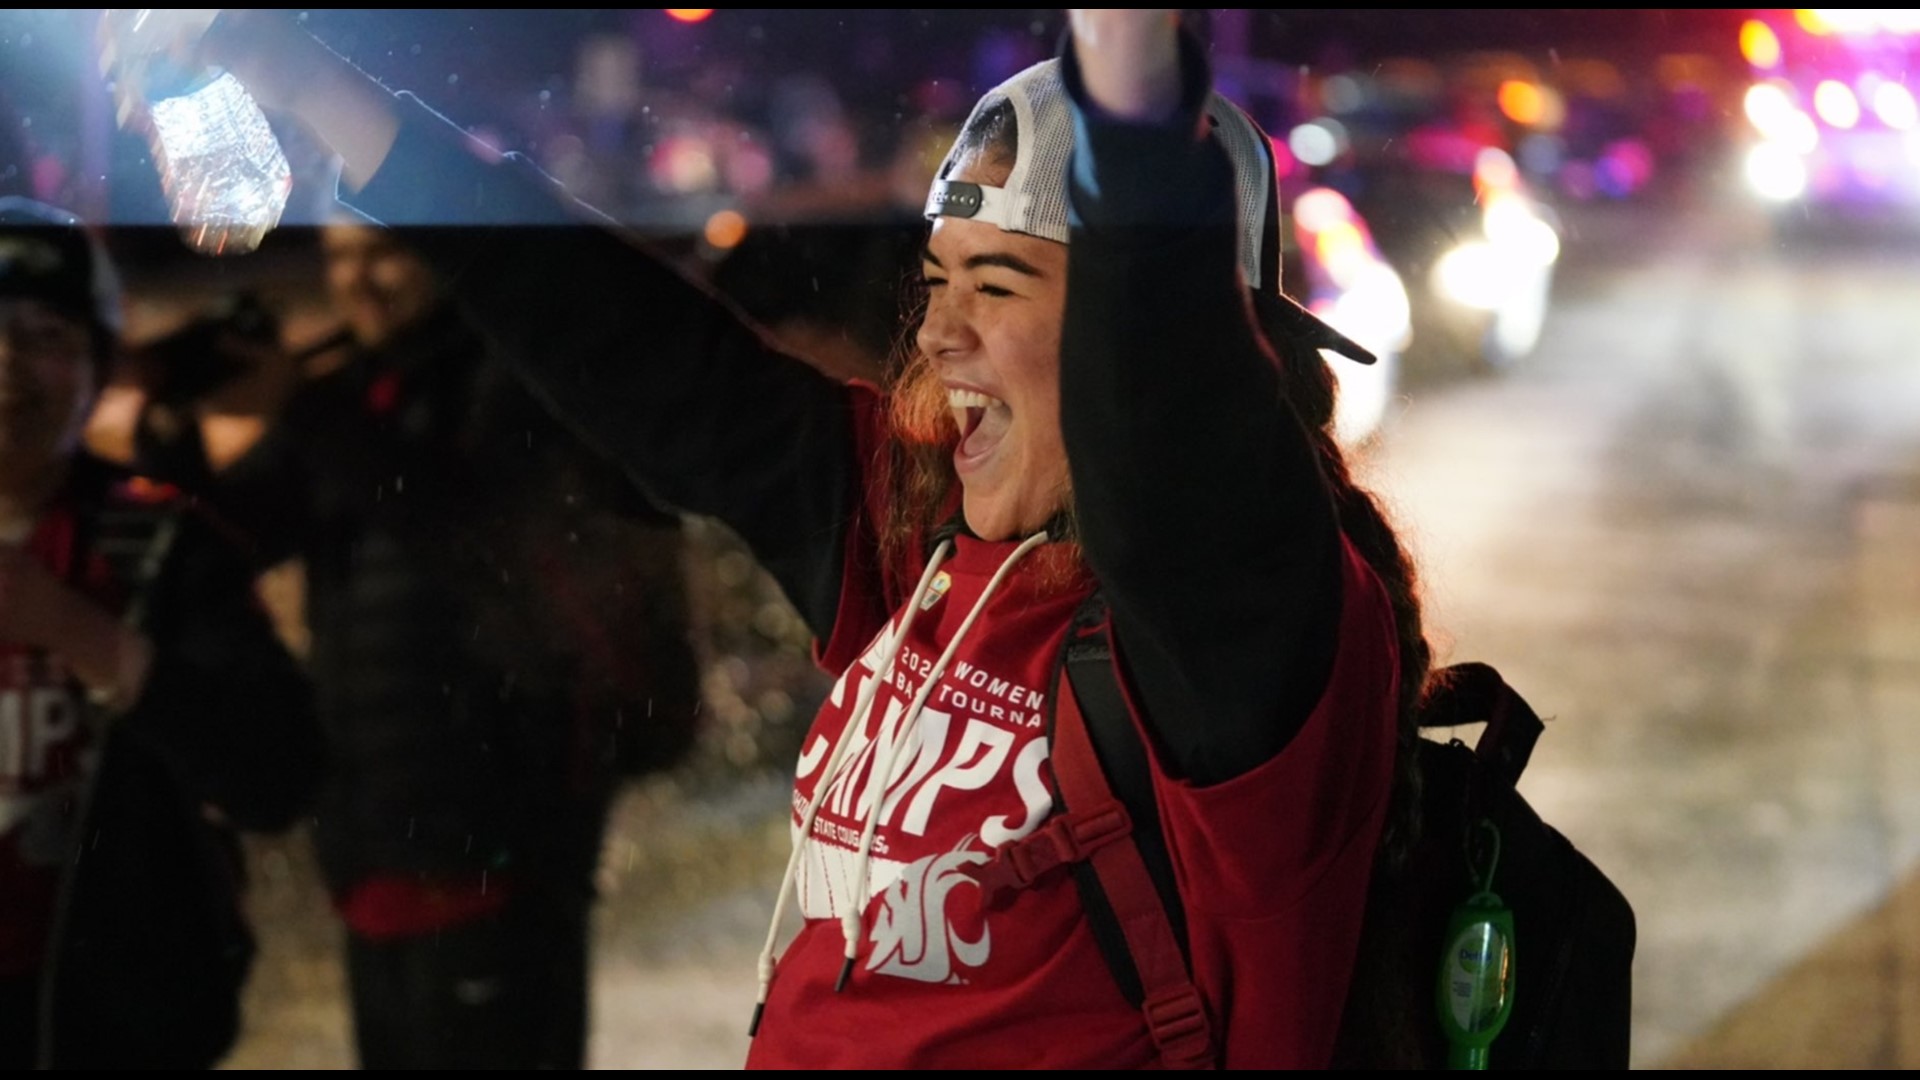 Hundreds of fans waited in freezing cold weather for the Cougs to return home to Pullman with the Pac-12 Championship trophy.